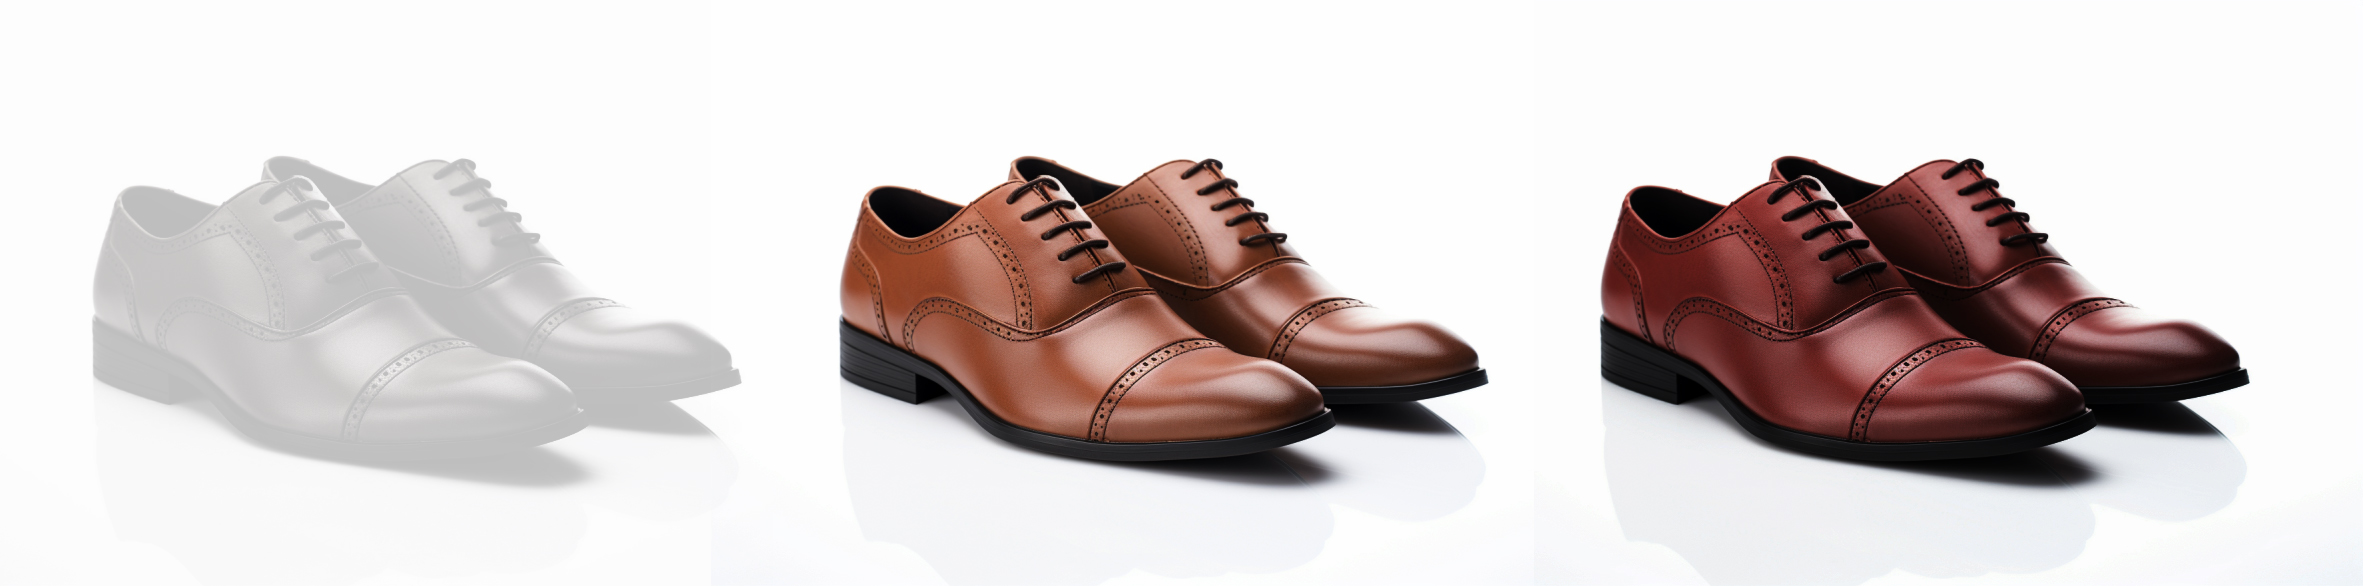 brown and burgundy dress shoes to wear with brown suit